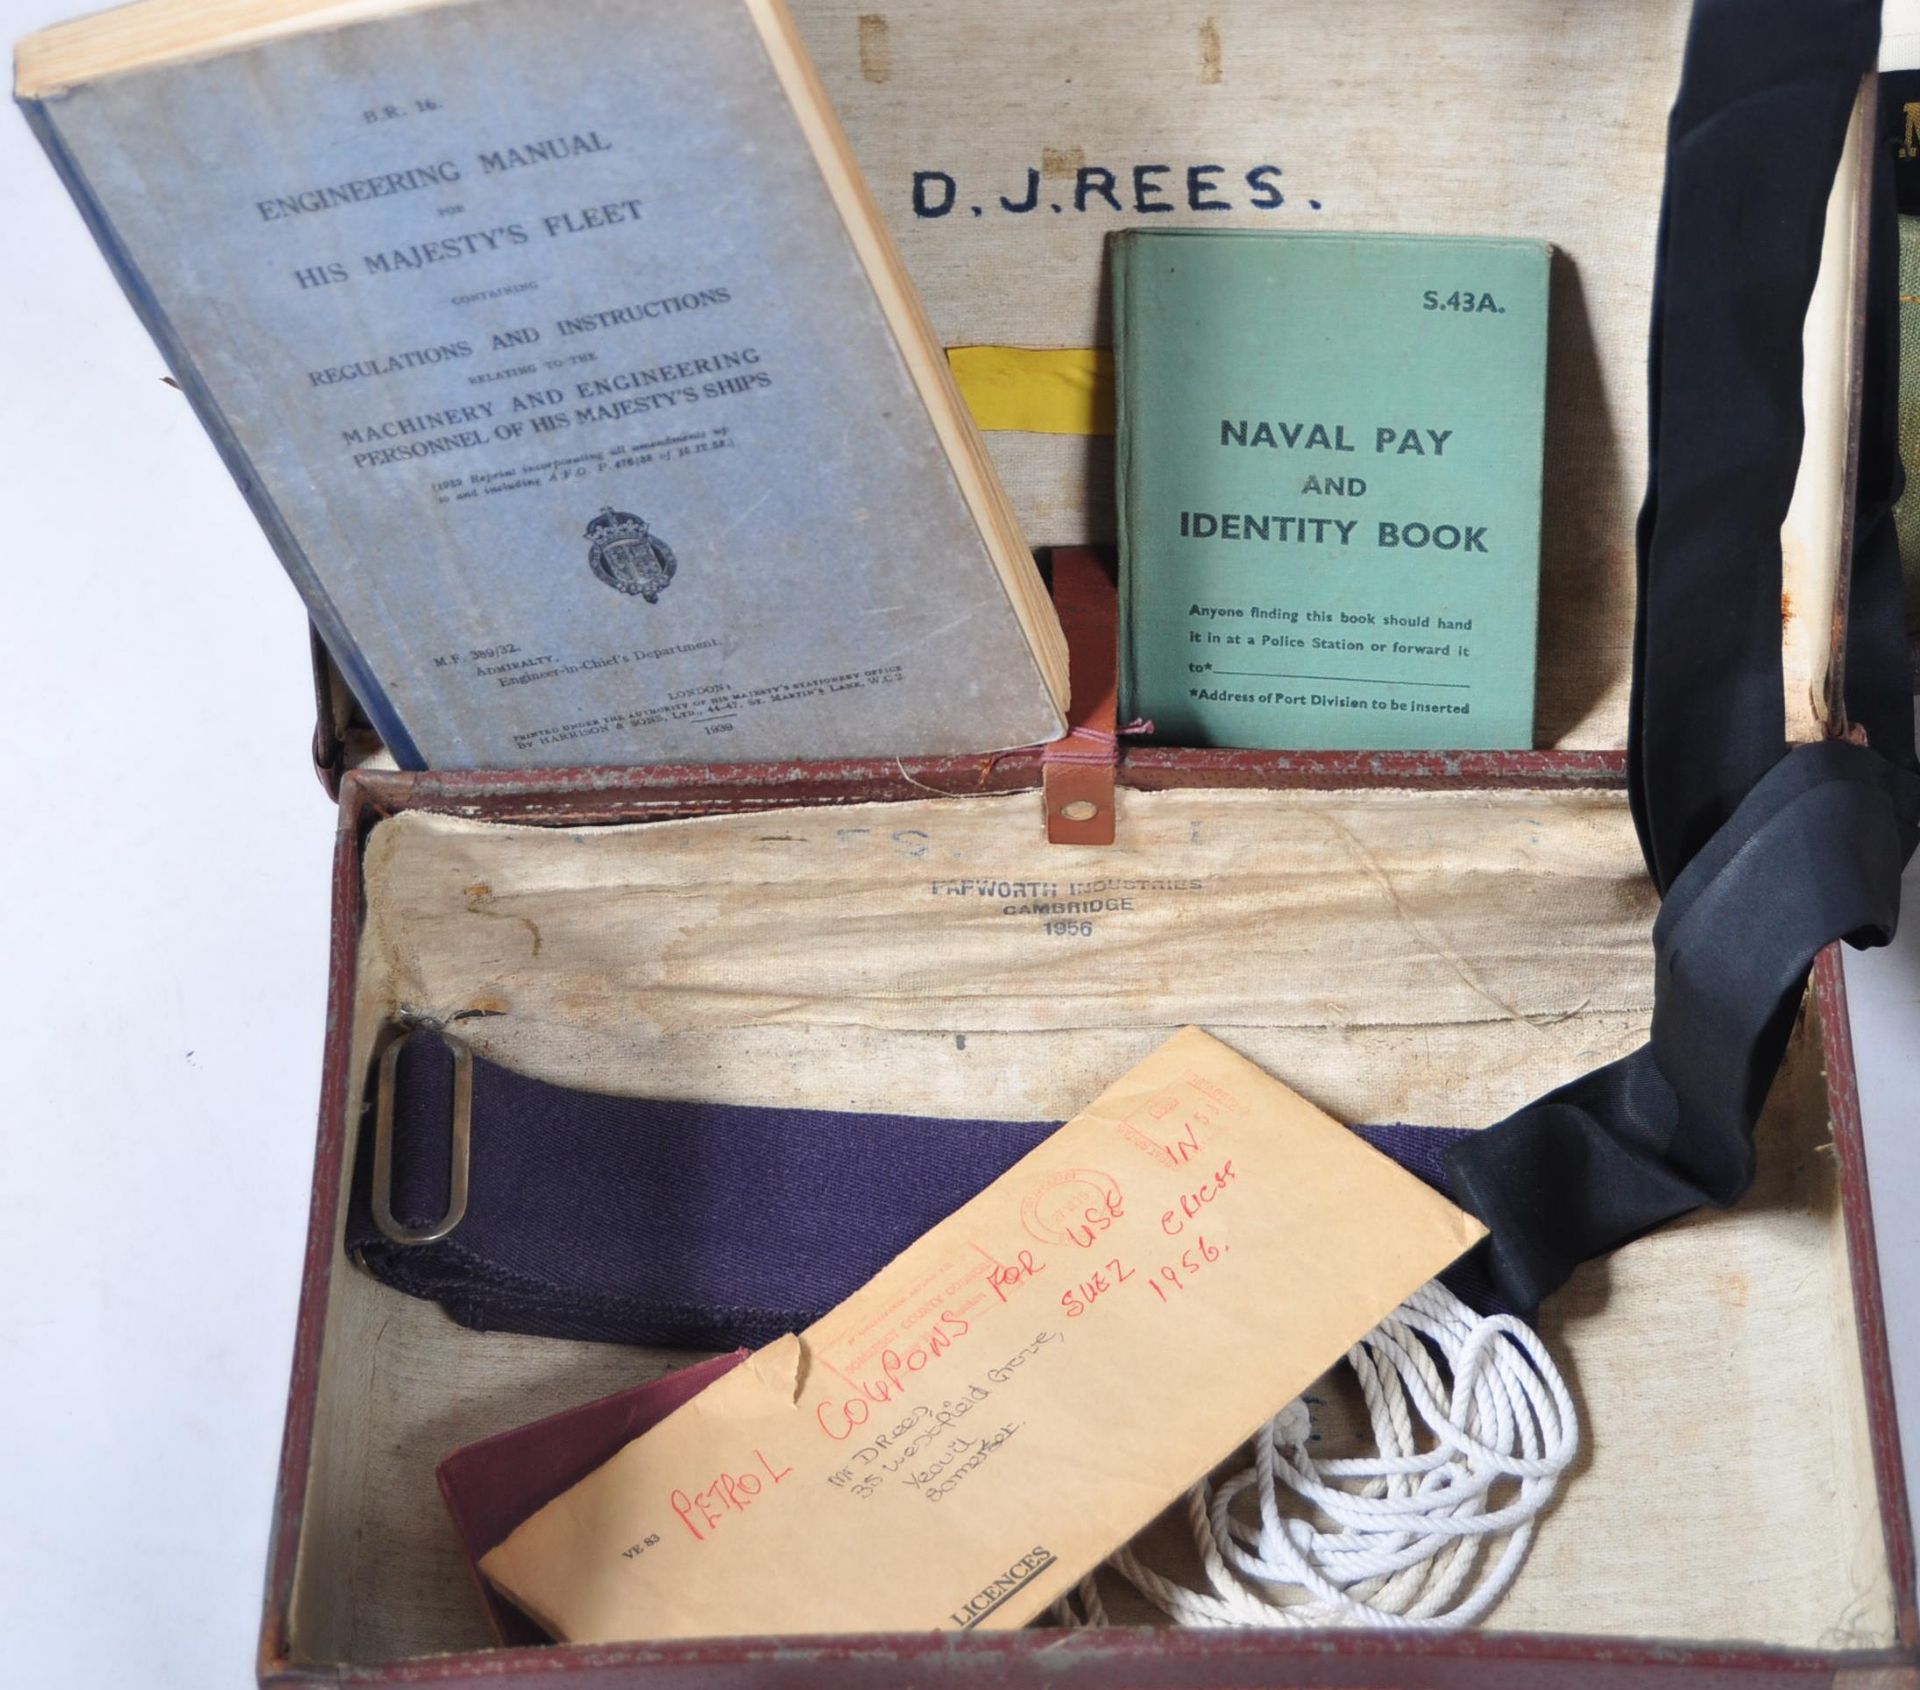 COLLECTION OF ROYAL NAVY UNIFORM ITEMS AND PERSONAL BELONGINGS - Image 5 of 9